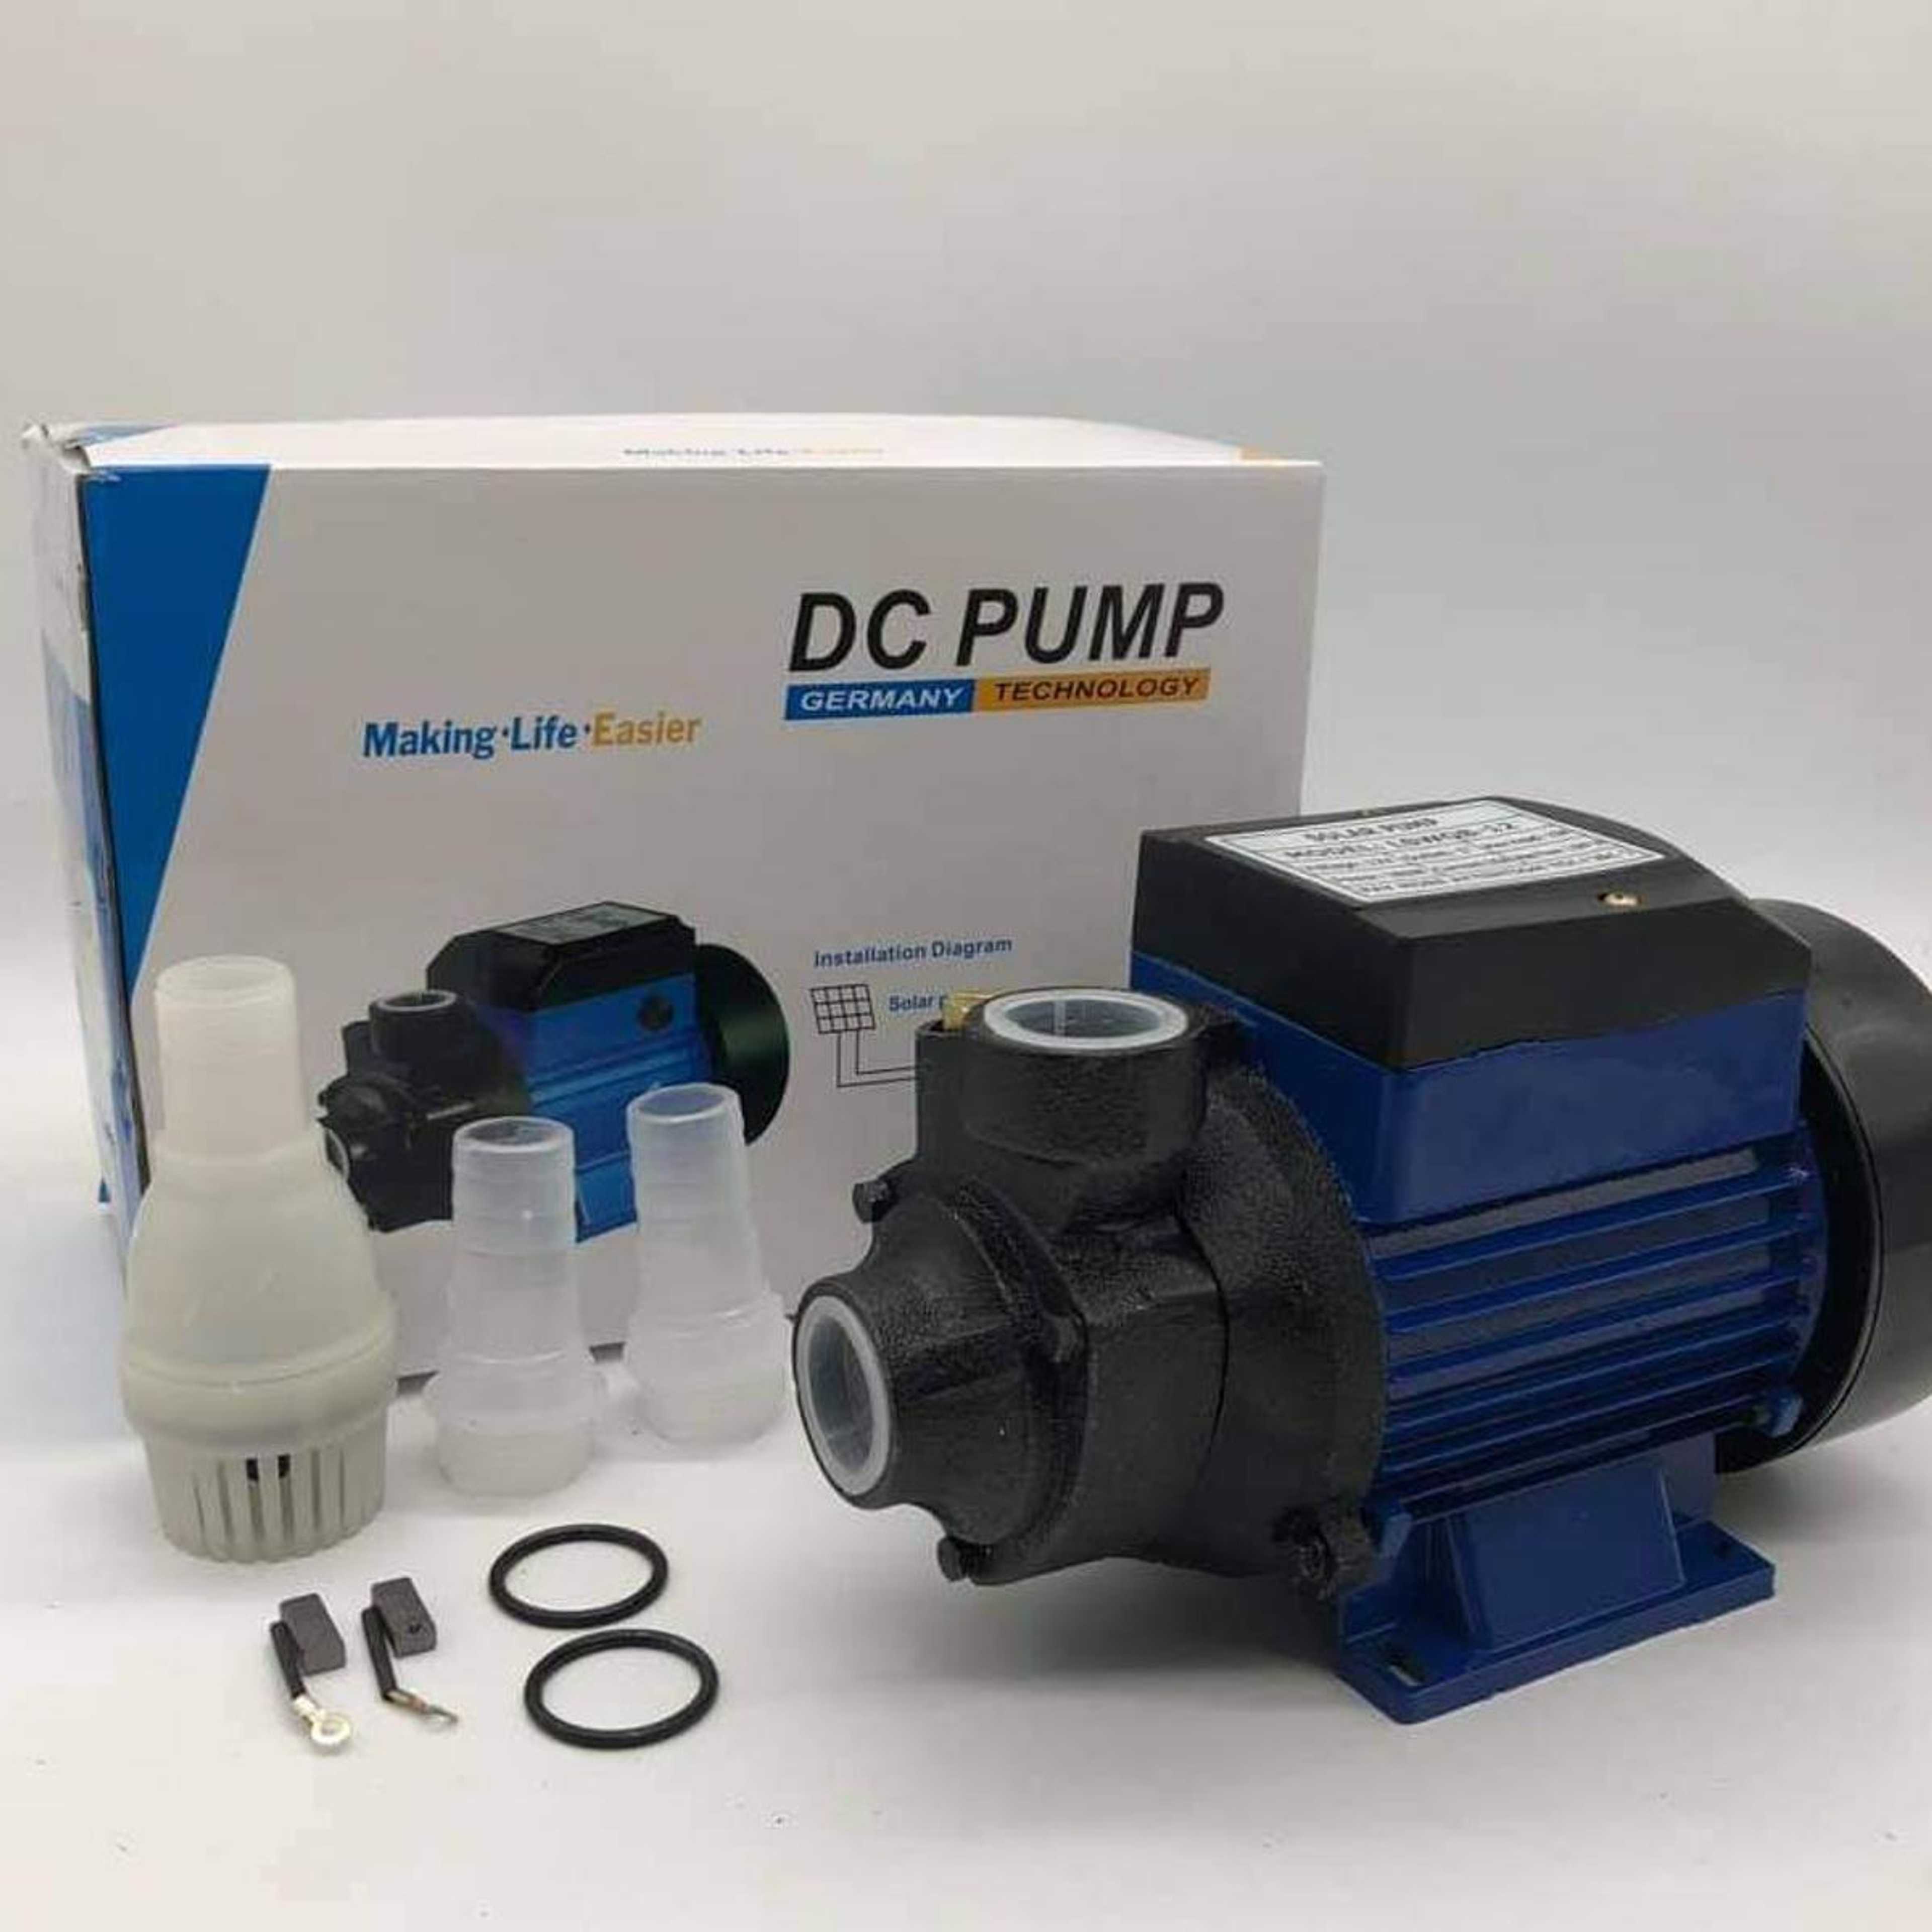 Water Pump, DC 12V Portable Transfer Pump with Unipolar Impeller Motor  Discharge Lift its works for 30 feet's and 2nd flower